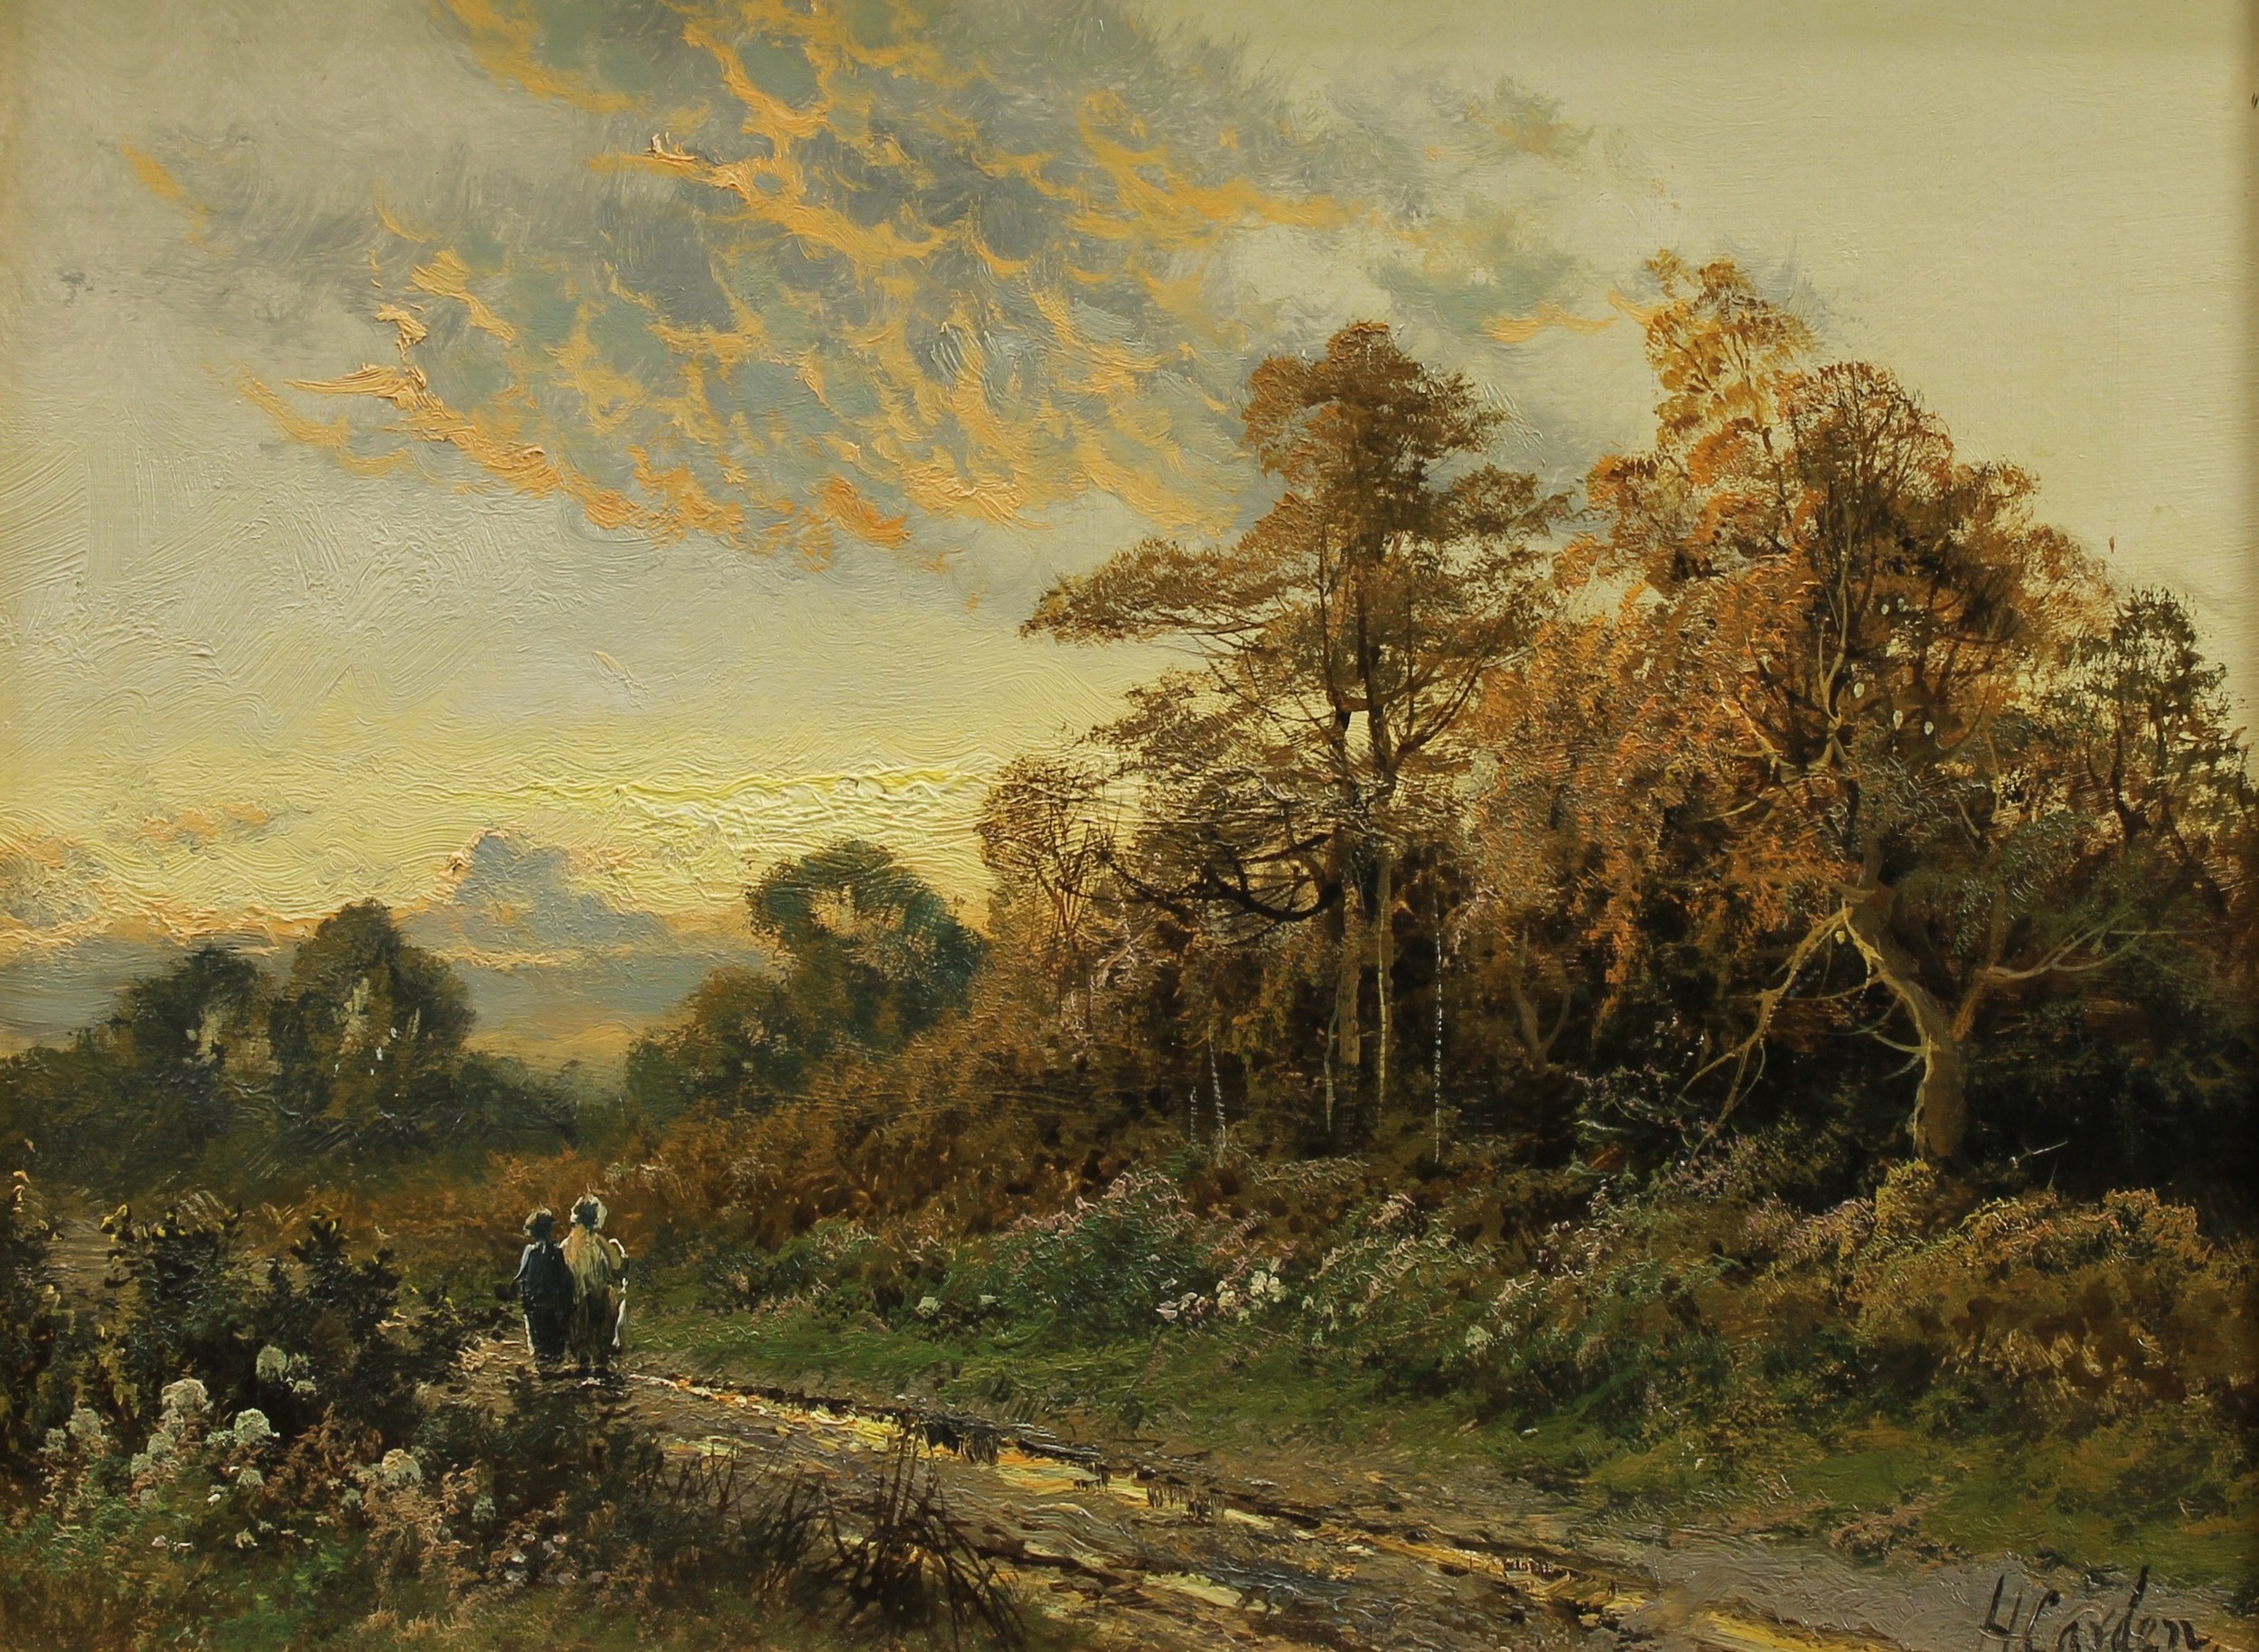 H. Carden (early 20th century) The Long Walk Home signed, oil on canvas, 29cm x 39.5cm